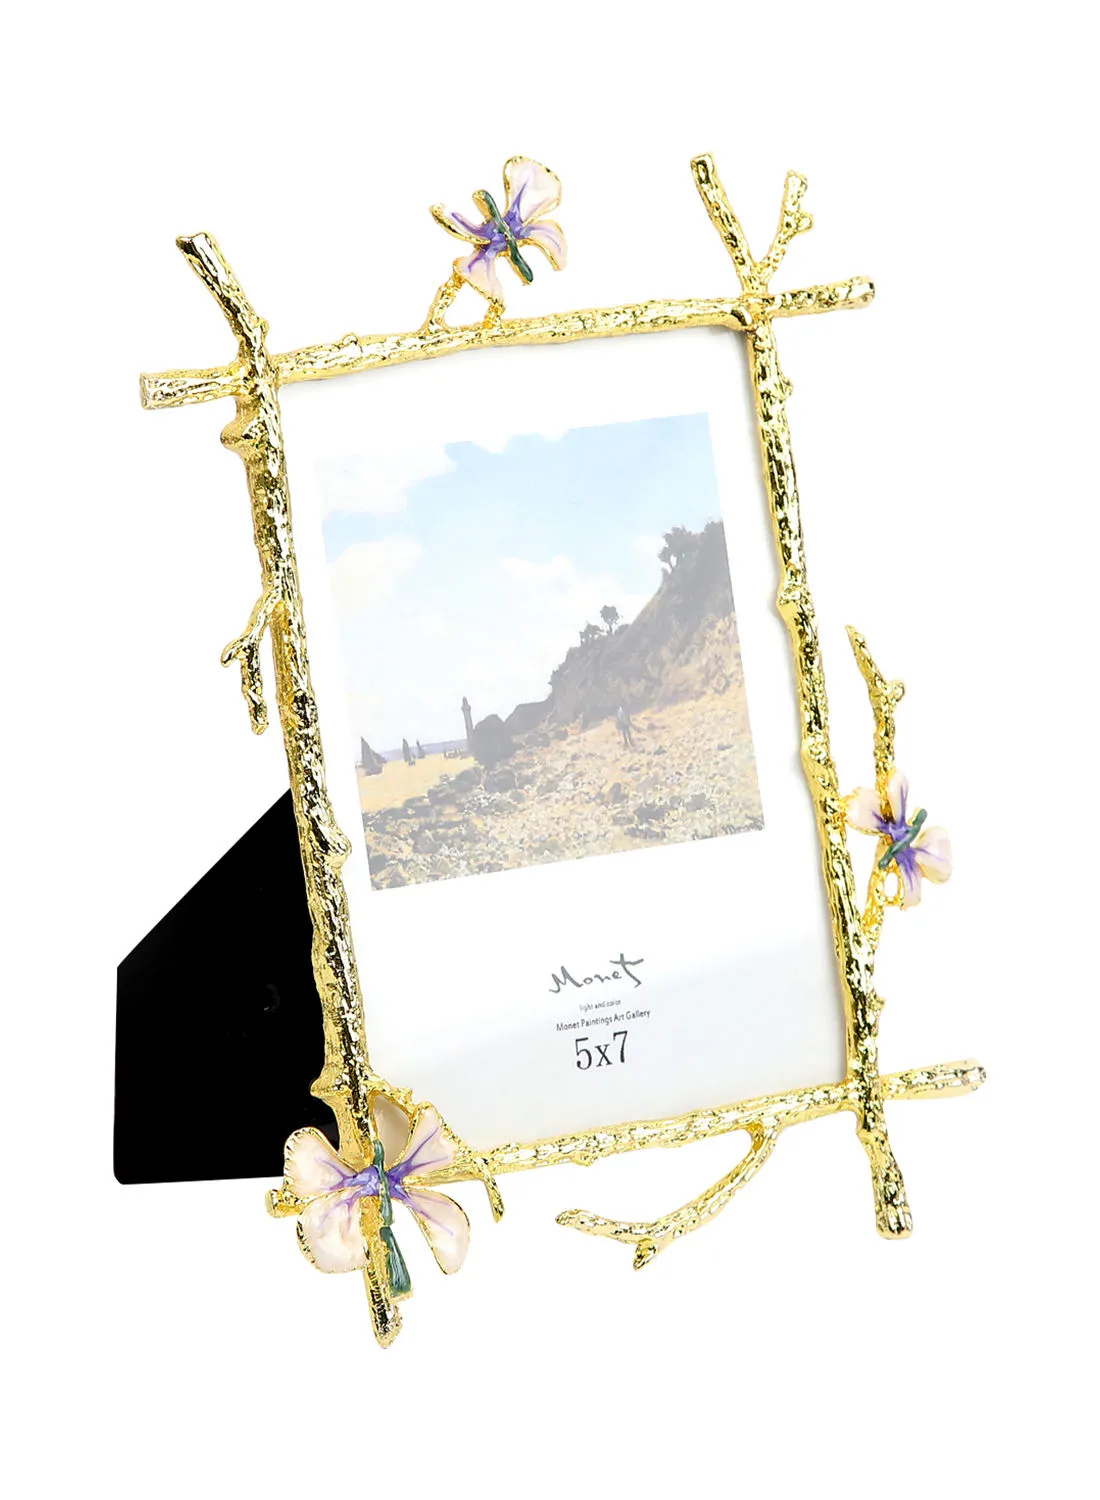 Switch Tabletop Photo Frames With Outer Frame Gold Outer frame size--L18.5xH24.5 cm Photo size--5x7 inch